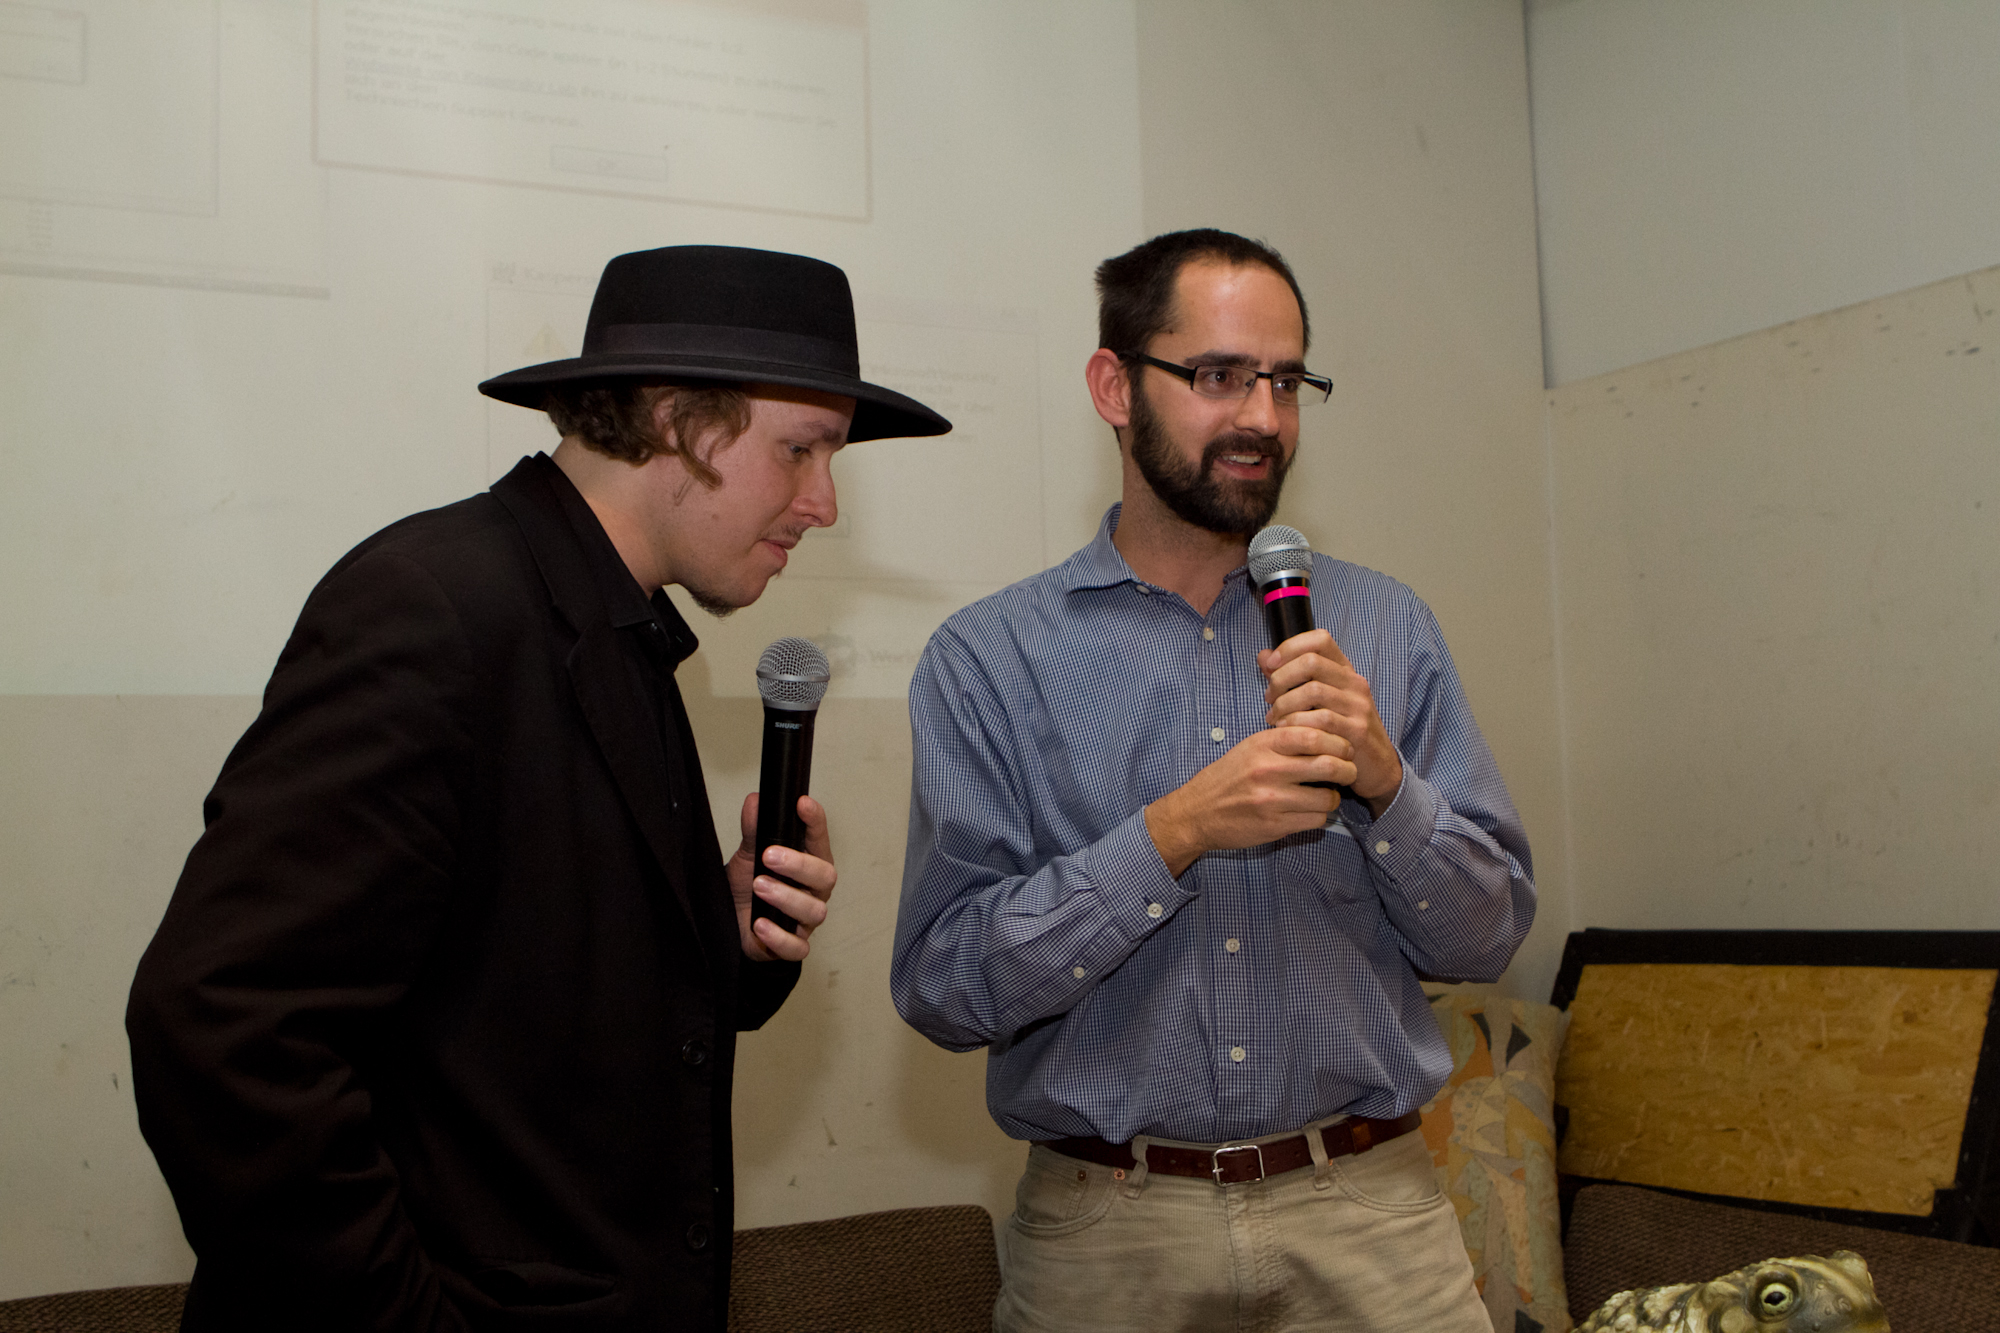 a man with glasses and a black hat on speaking